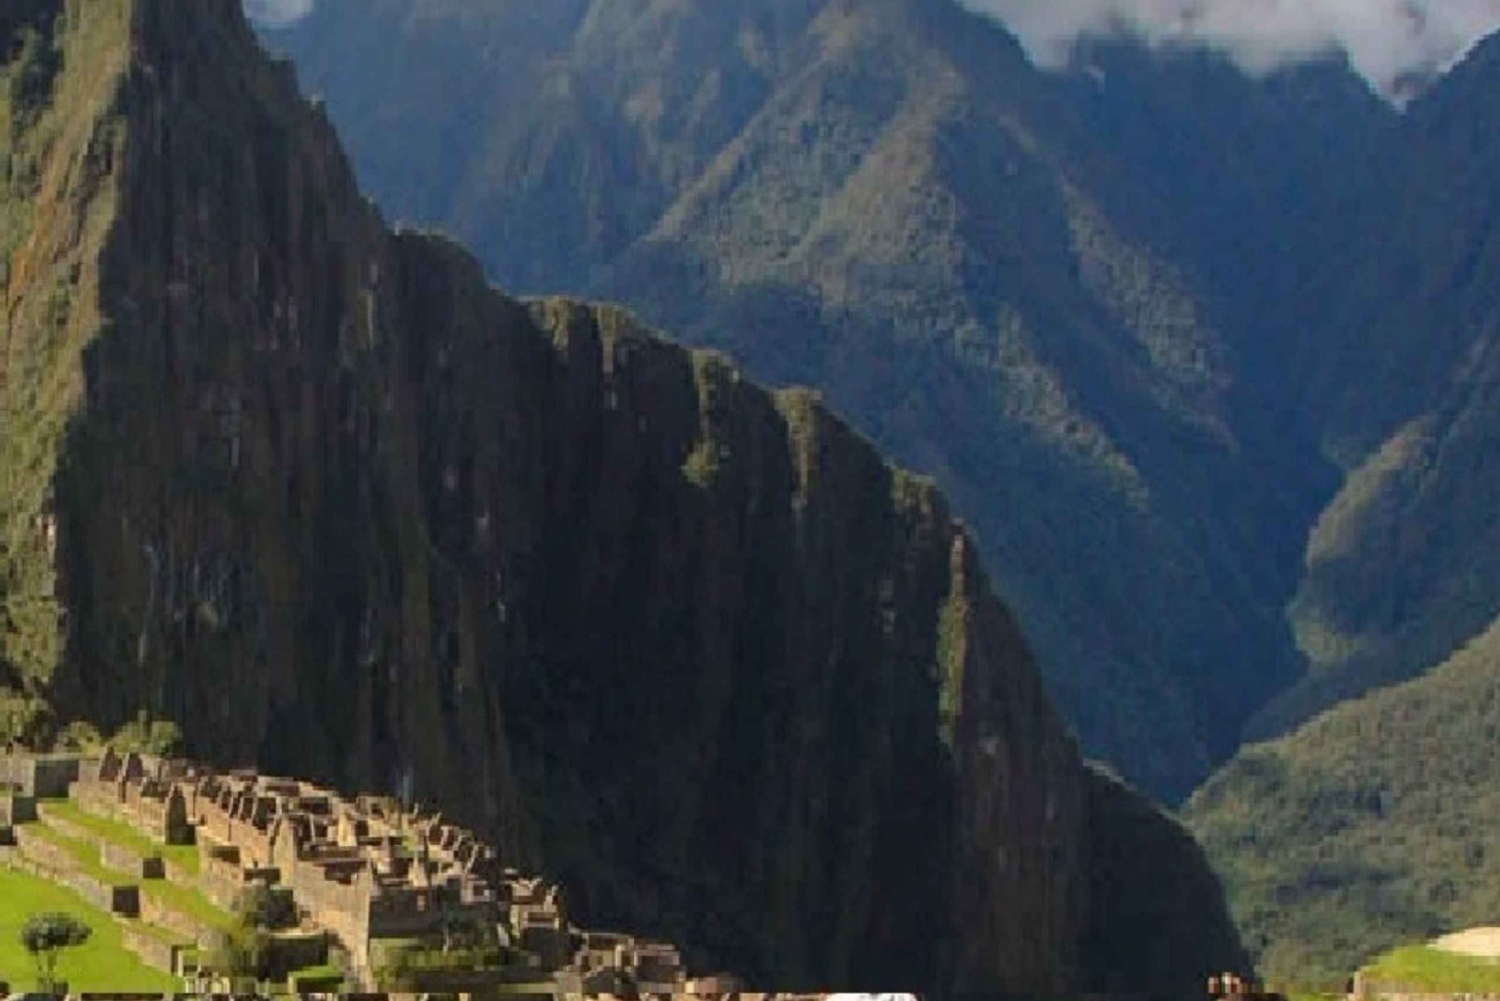 From Cusco: Inca Trail to Machu Picchu 4-Day Hike with Meals